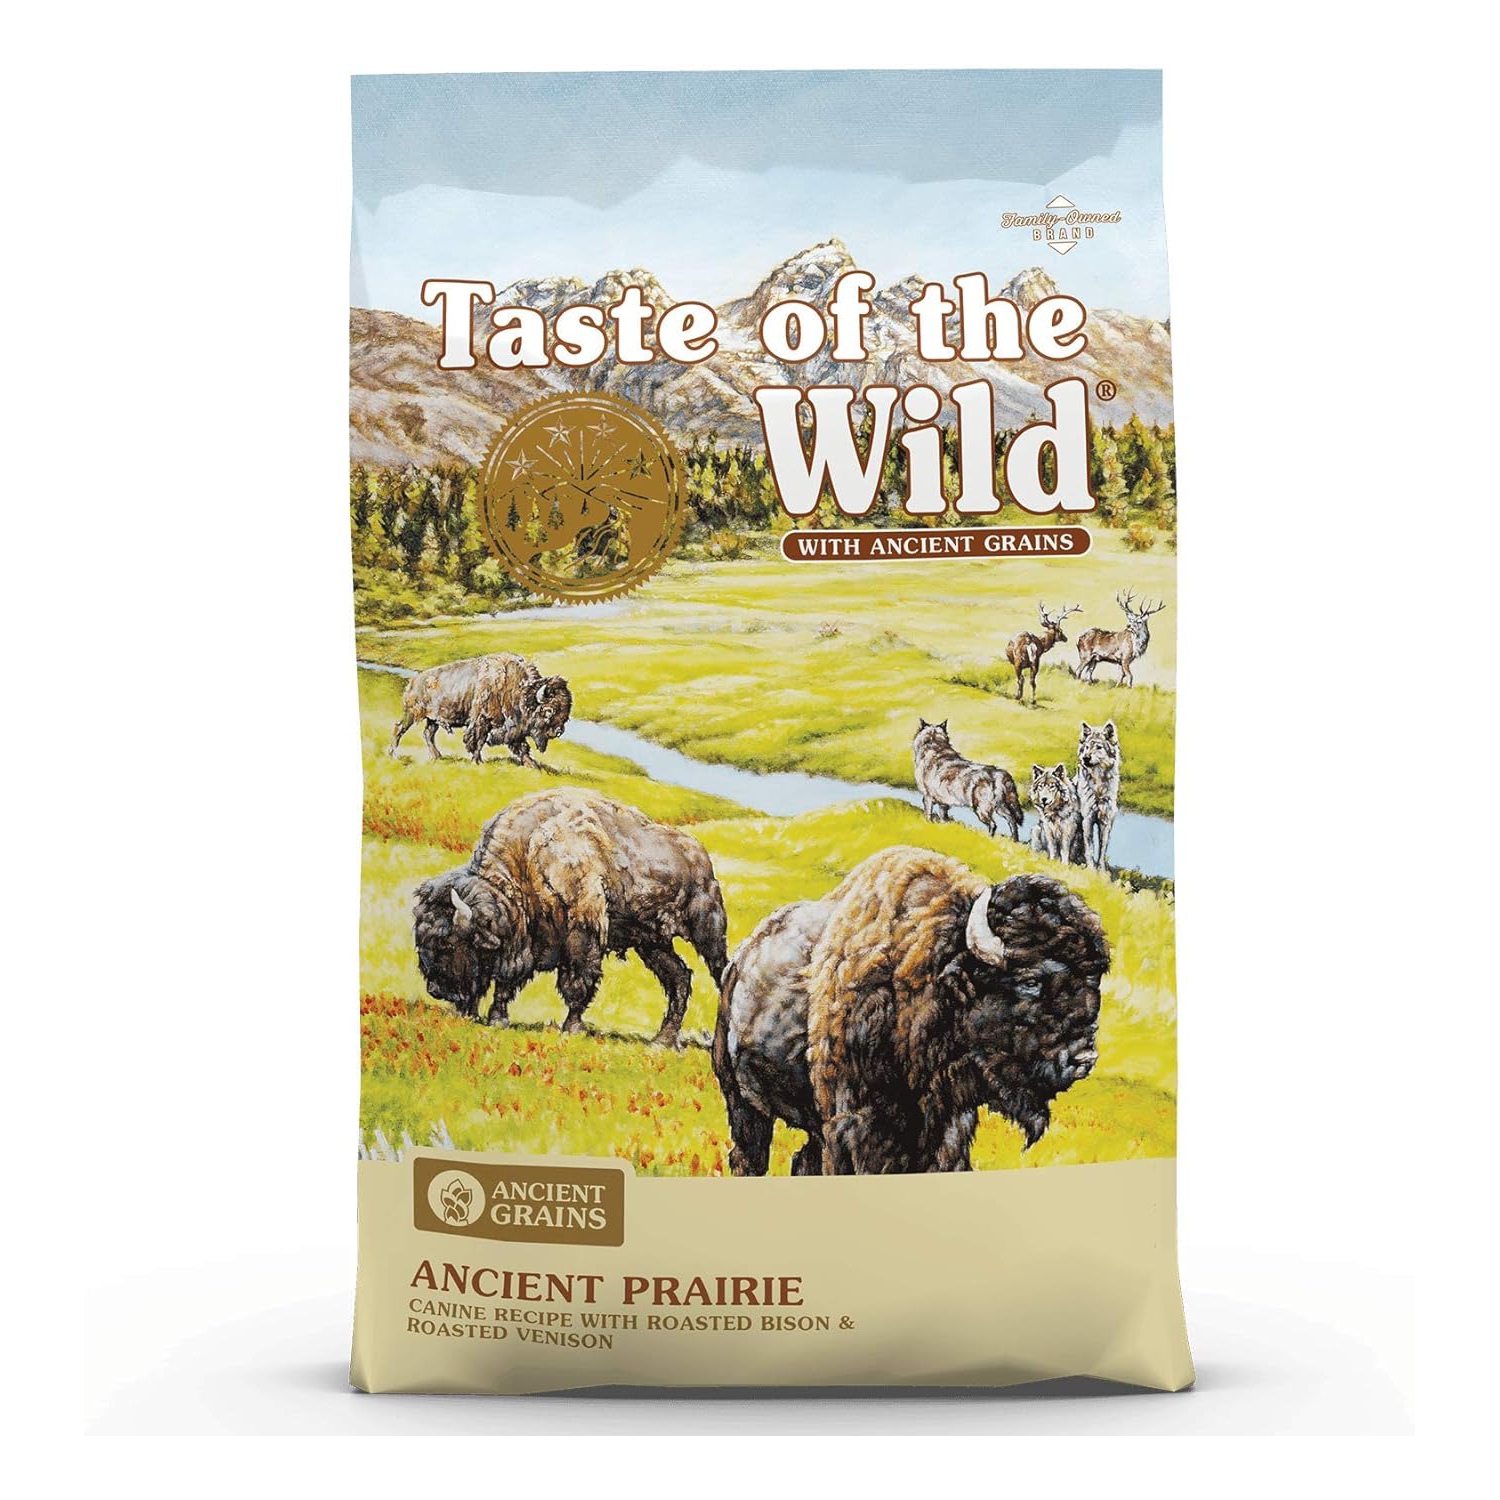 Taste of the Wild with Ancient Grains, Ancient Prairie Canine Recipe with Roasted Bison and Venison Dry Dog Food